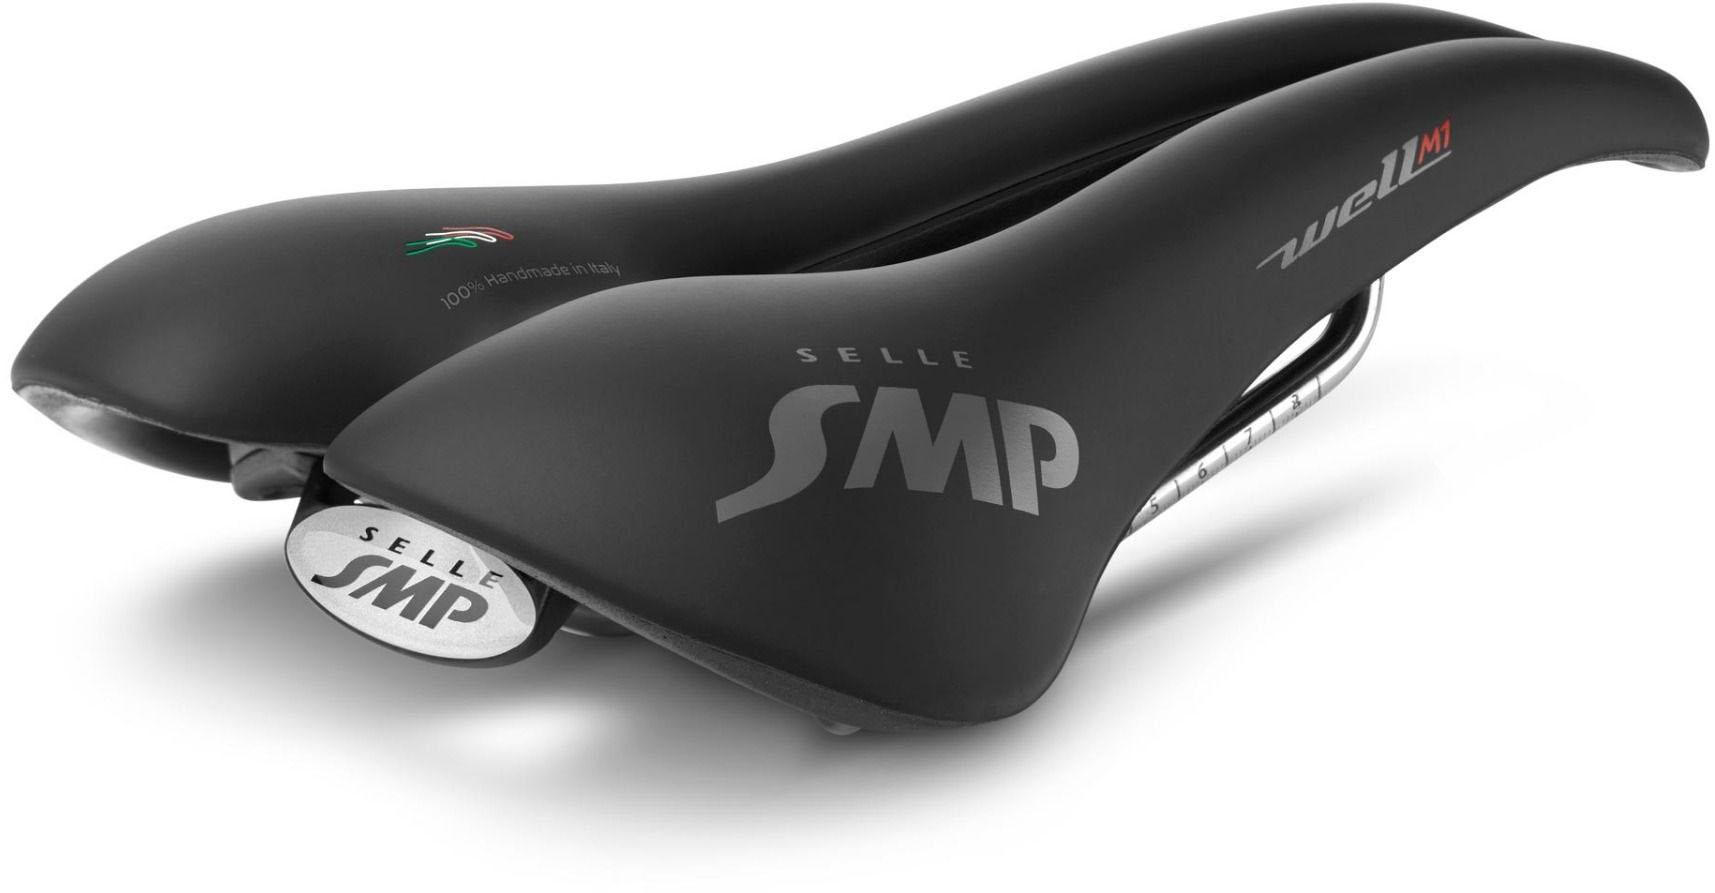 Selle Smp Well M1 Saddle - Black